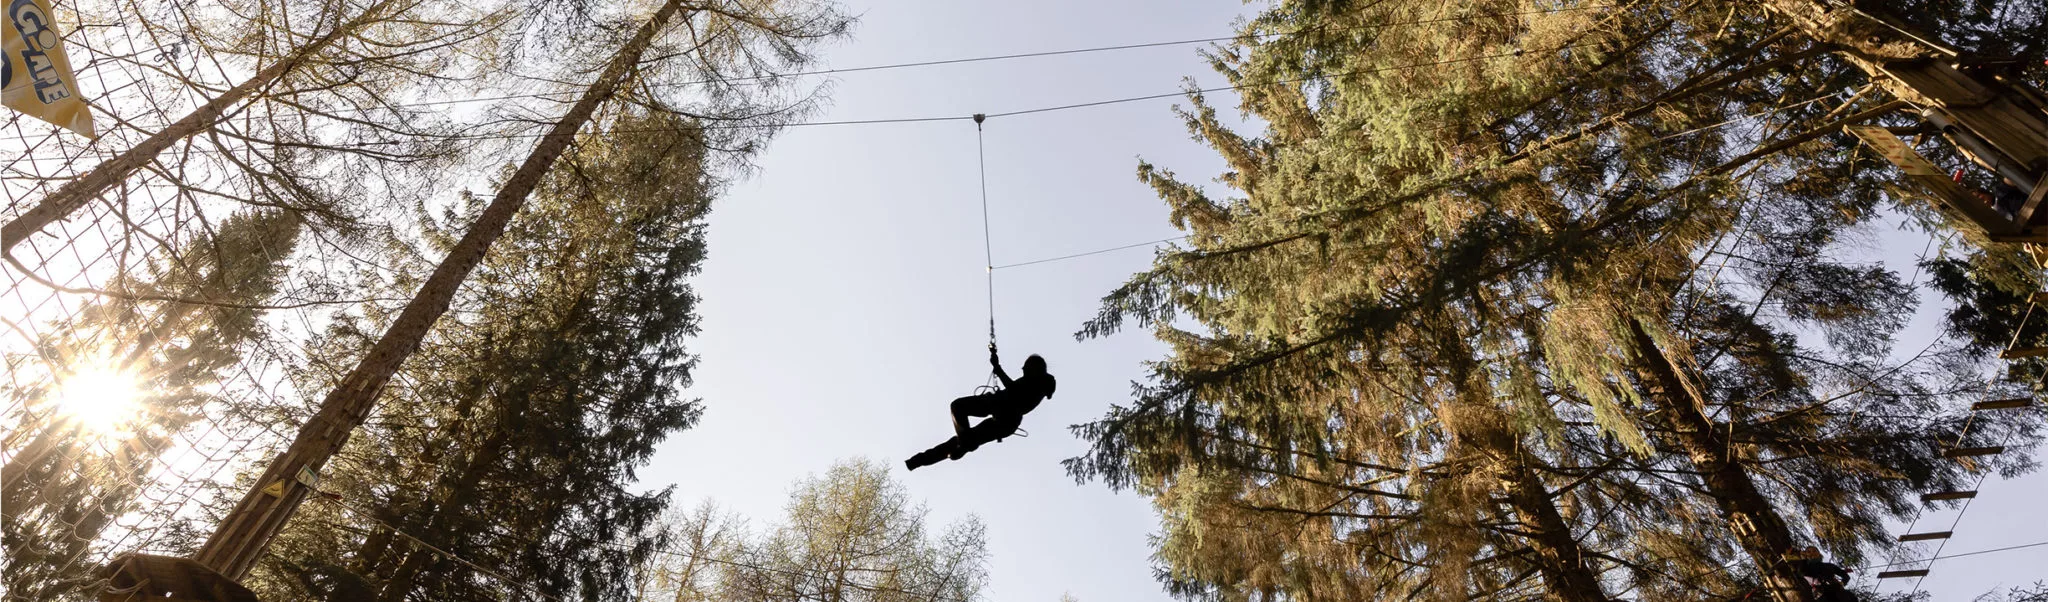 A person ziplining through the trees